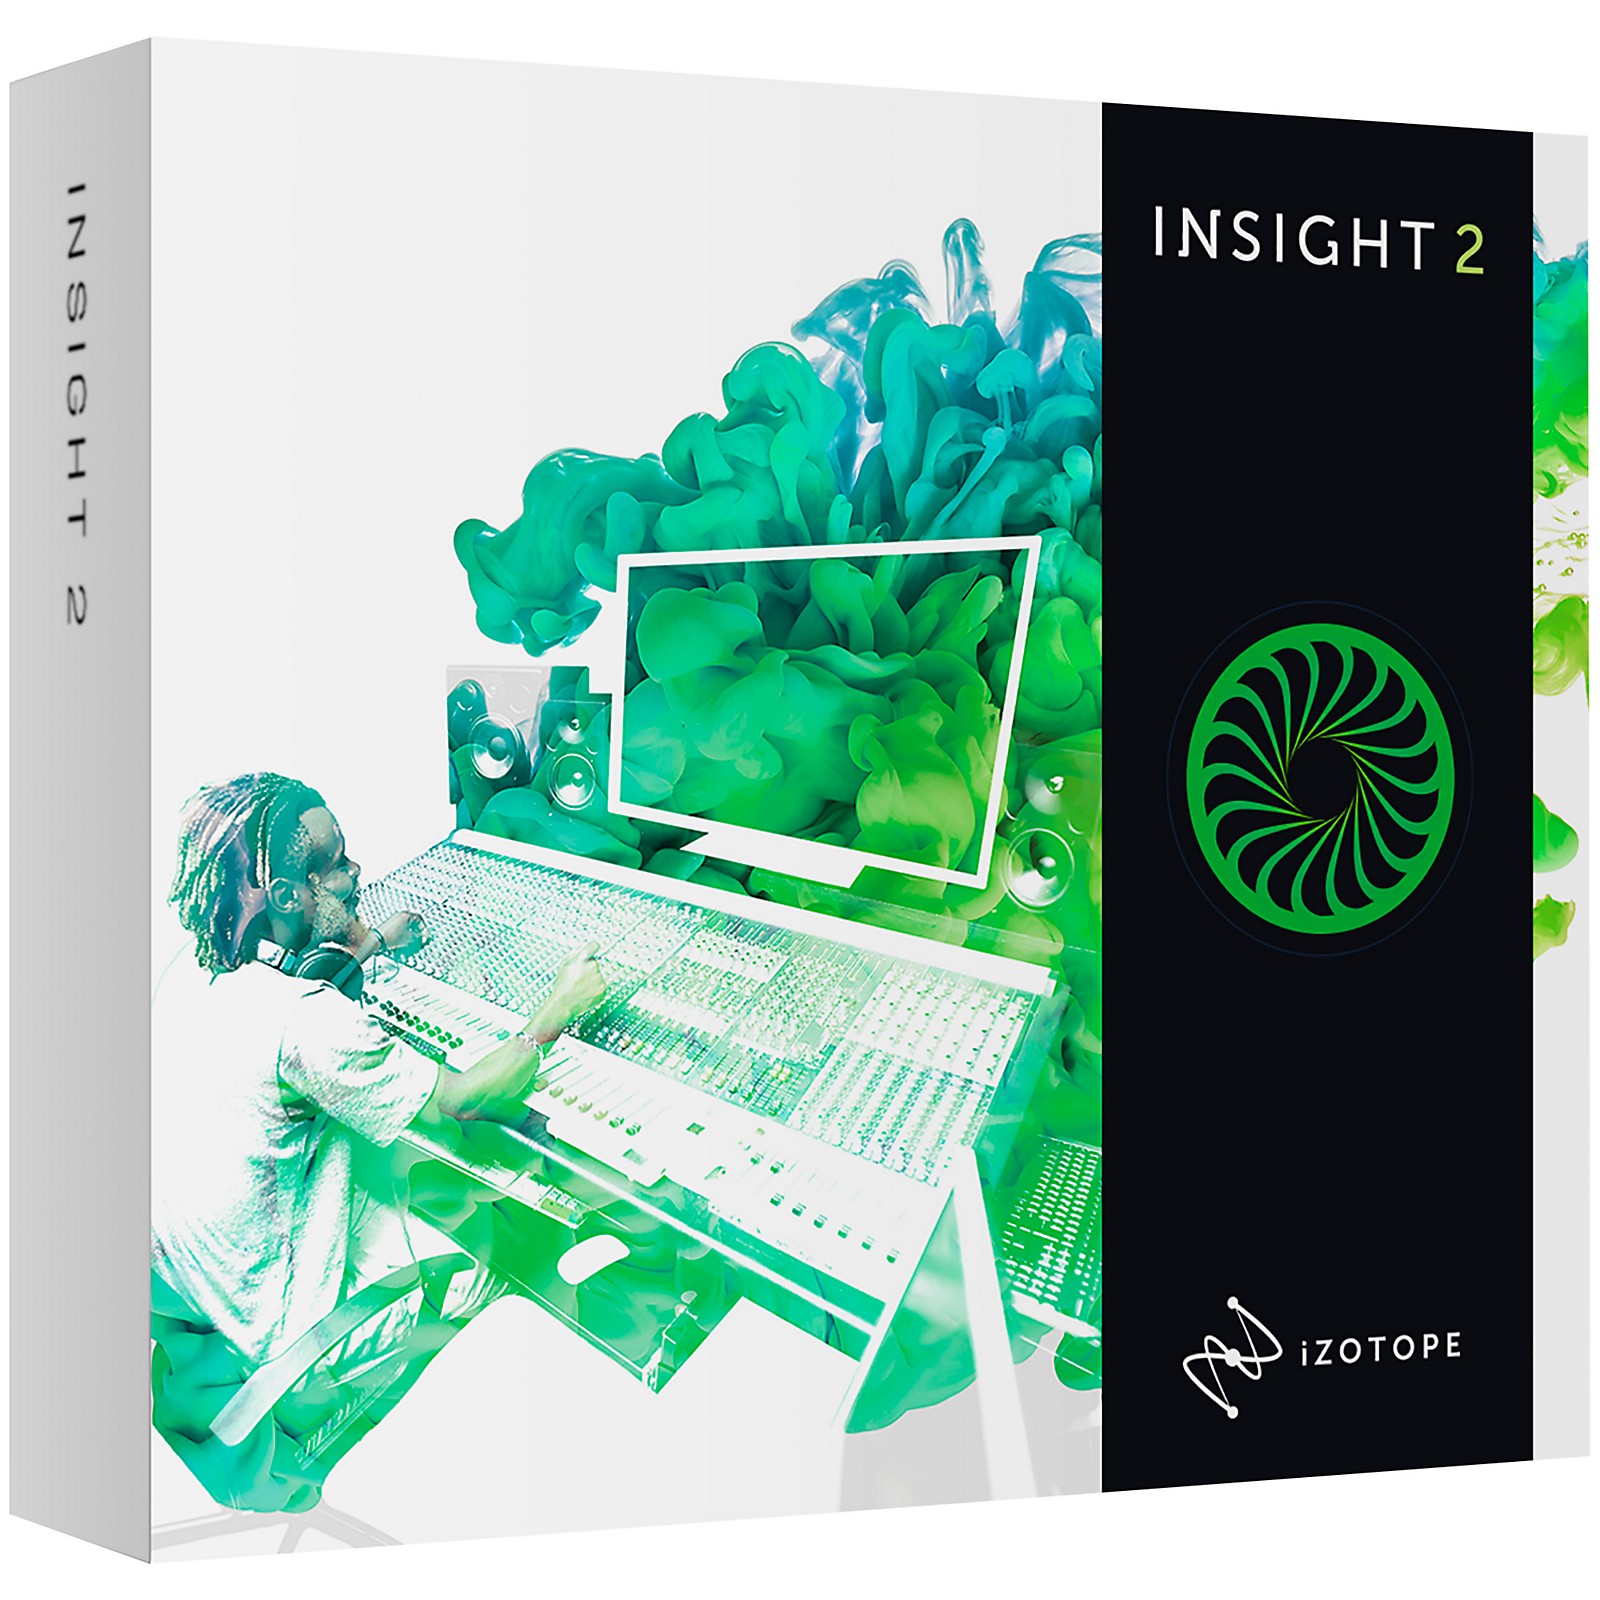 best setting for izotope insight